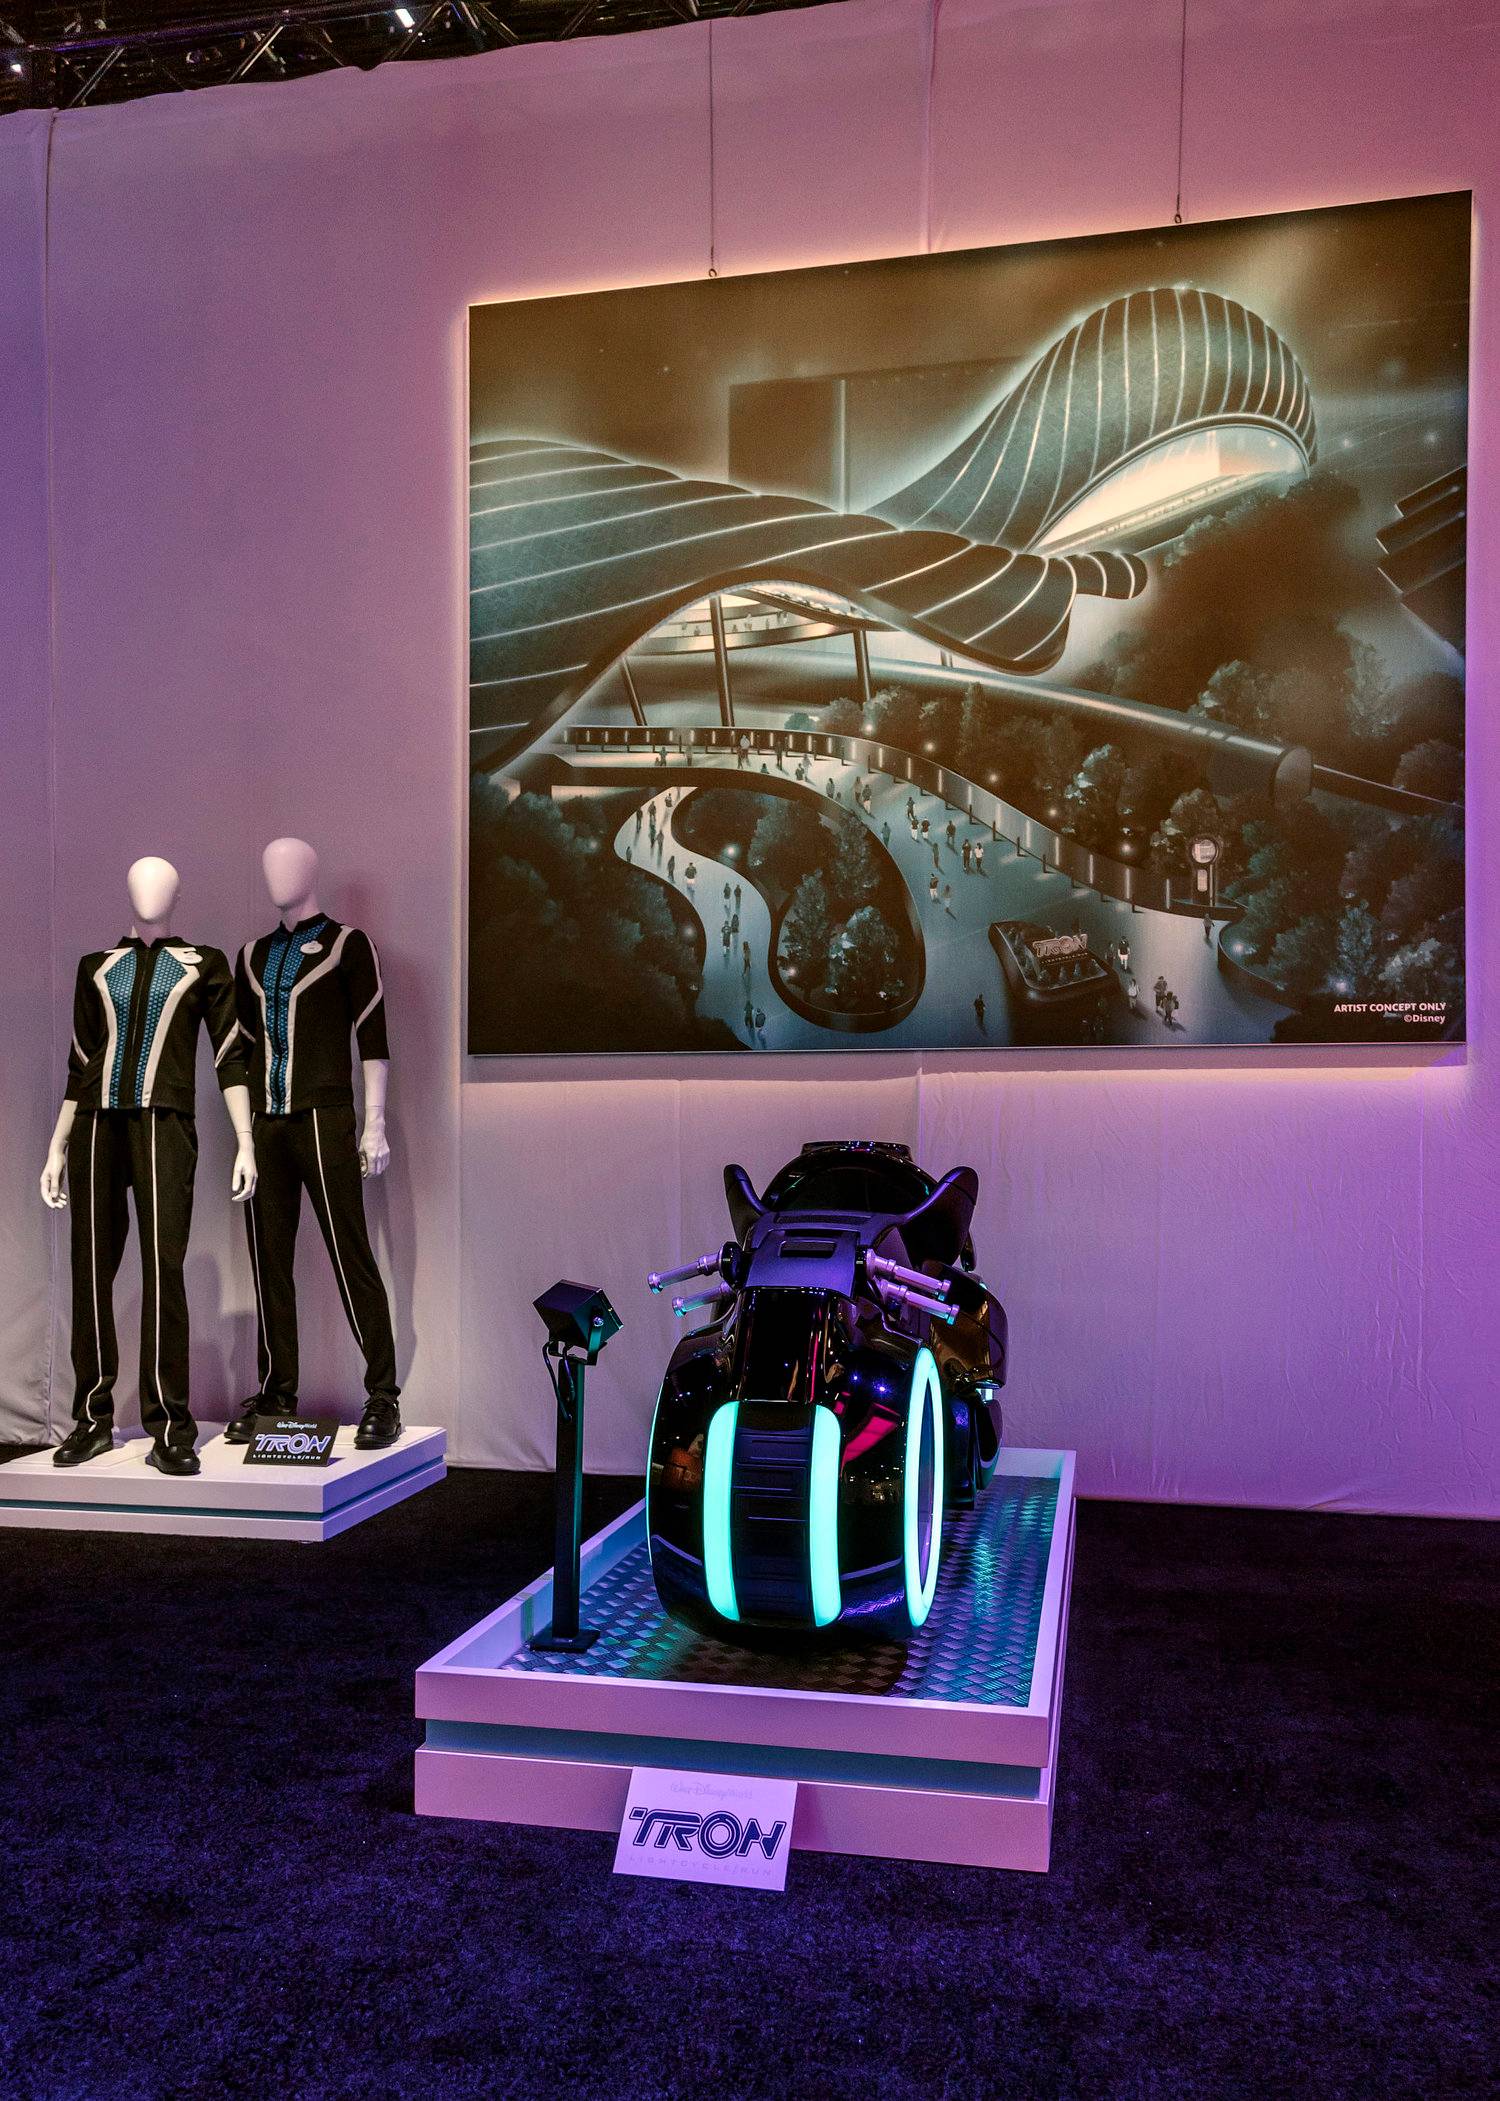 TRON Lightcycle Run costume and ride vehicle